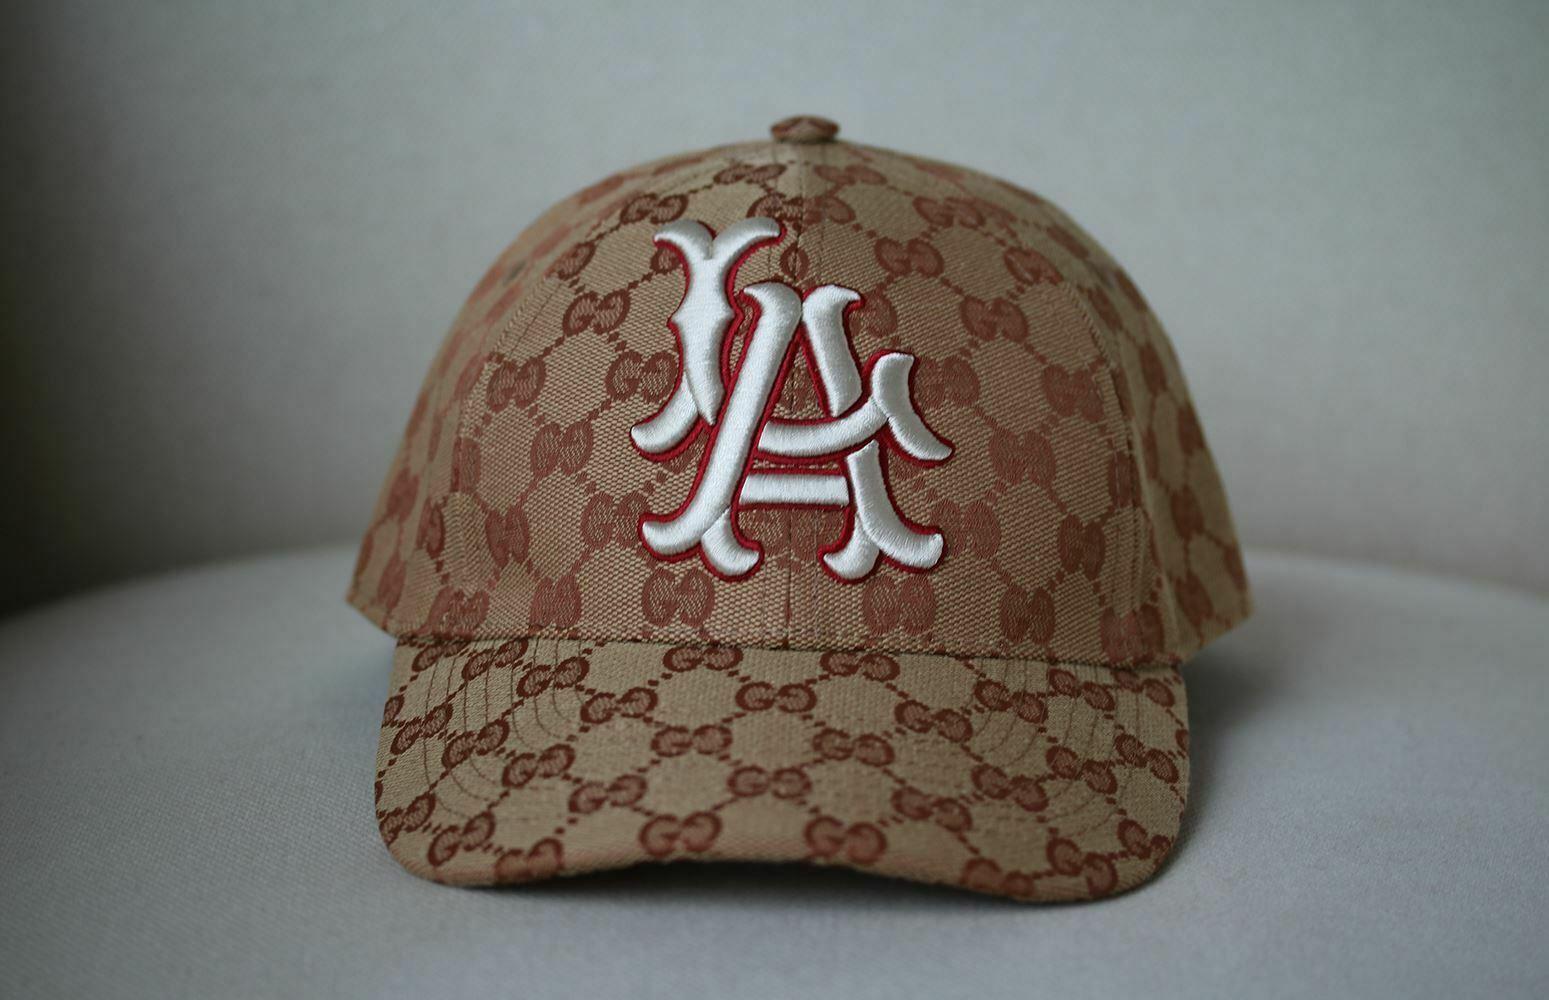 Inspired by the Creative Director's New York Yankees baseball hat, Gucci incorporated a mix of Major League Baseball teams into the Fall Winter 2018 Fashion Show collection. The Los Angeles Angels patch decorates a baseball cap in Original GG canvas